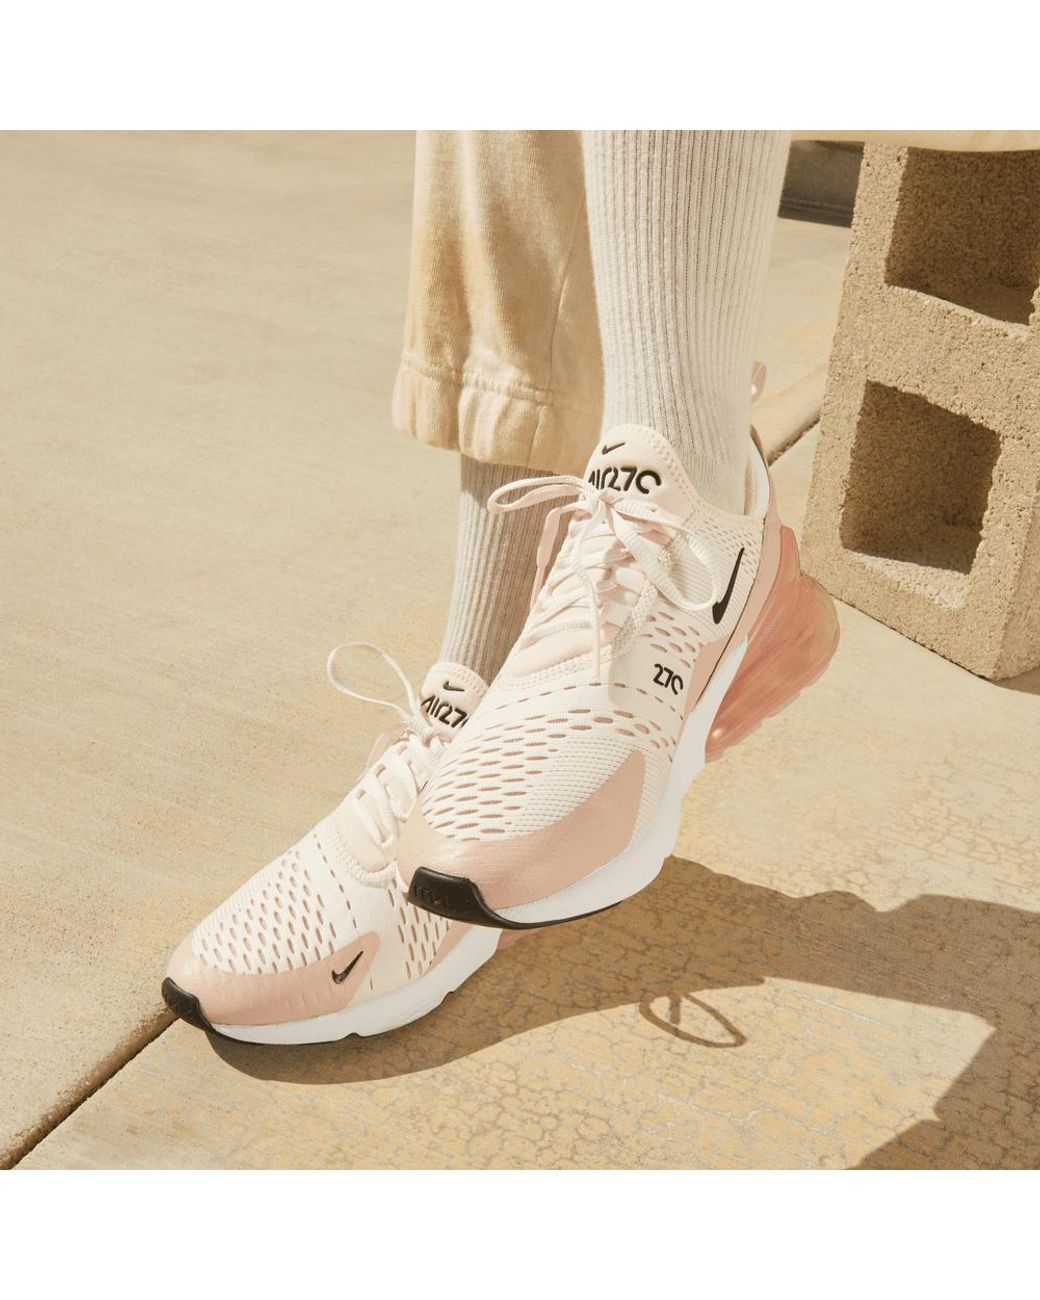 Nike Air Max 270 Shoes in Pink | Lyst